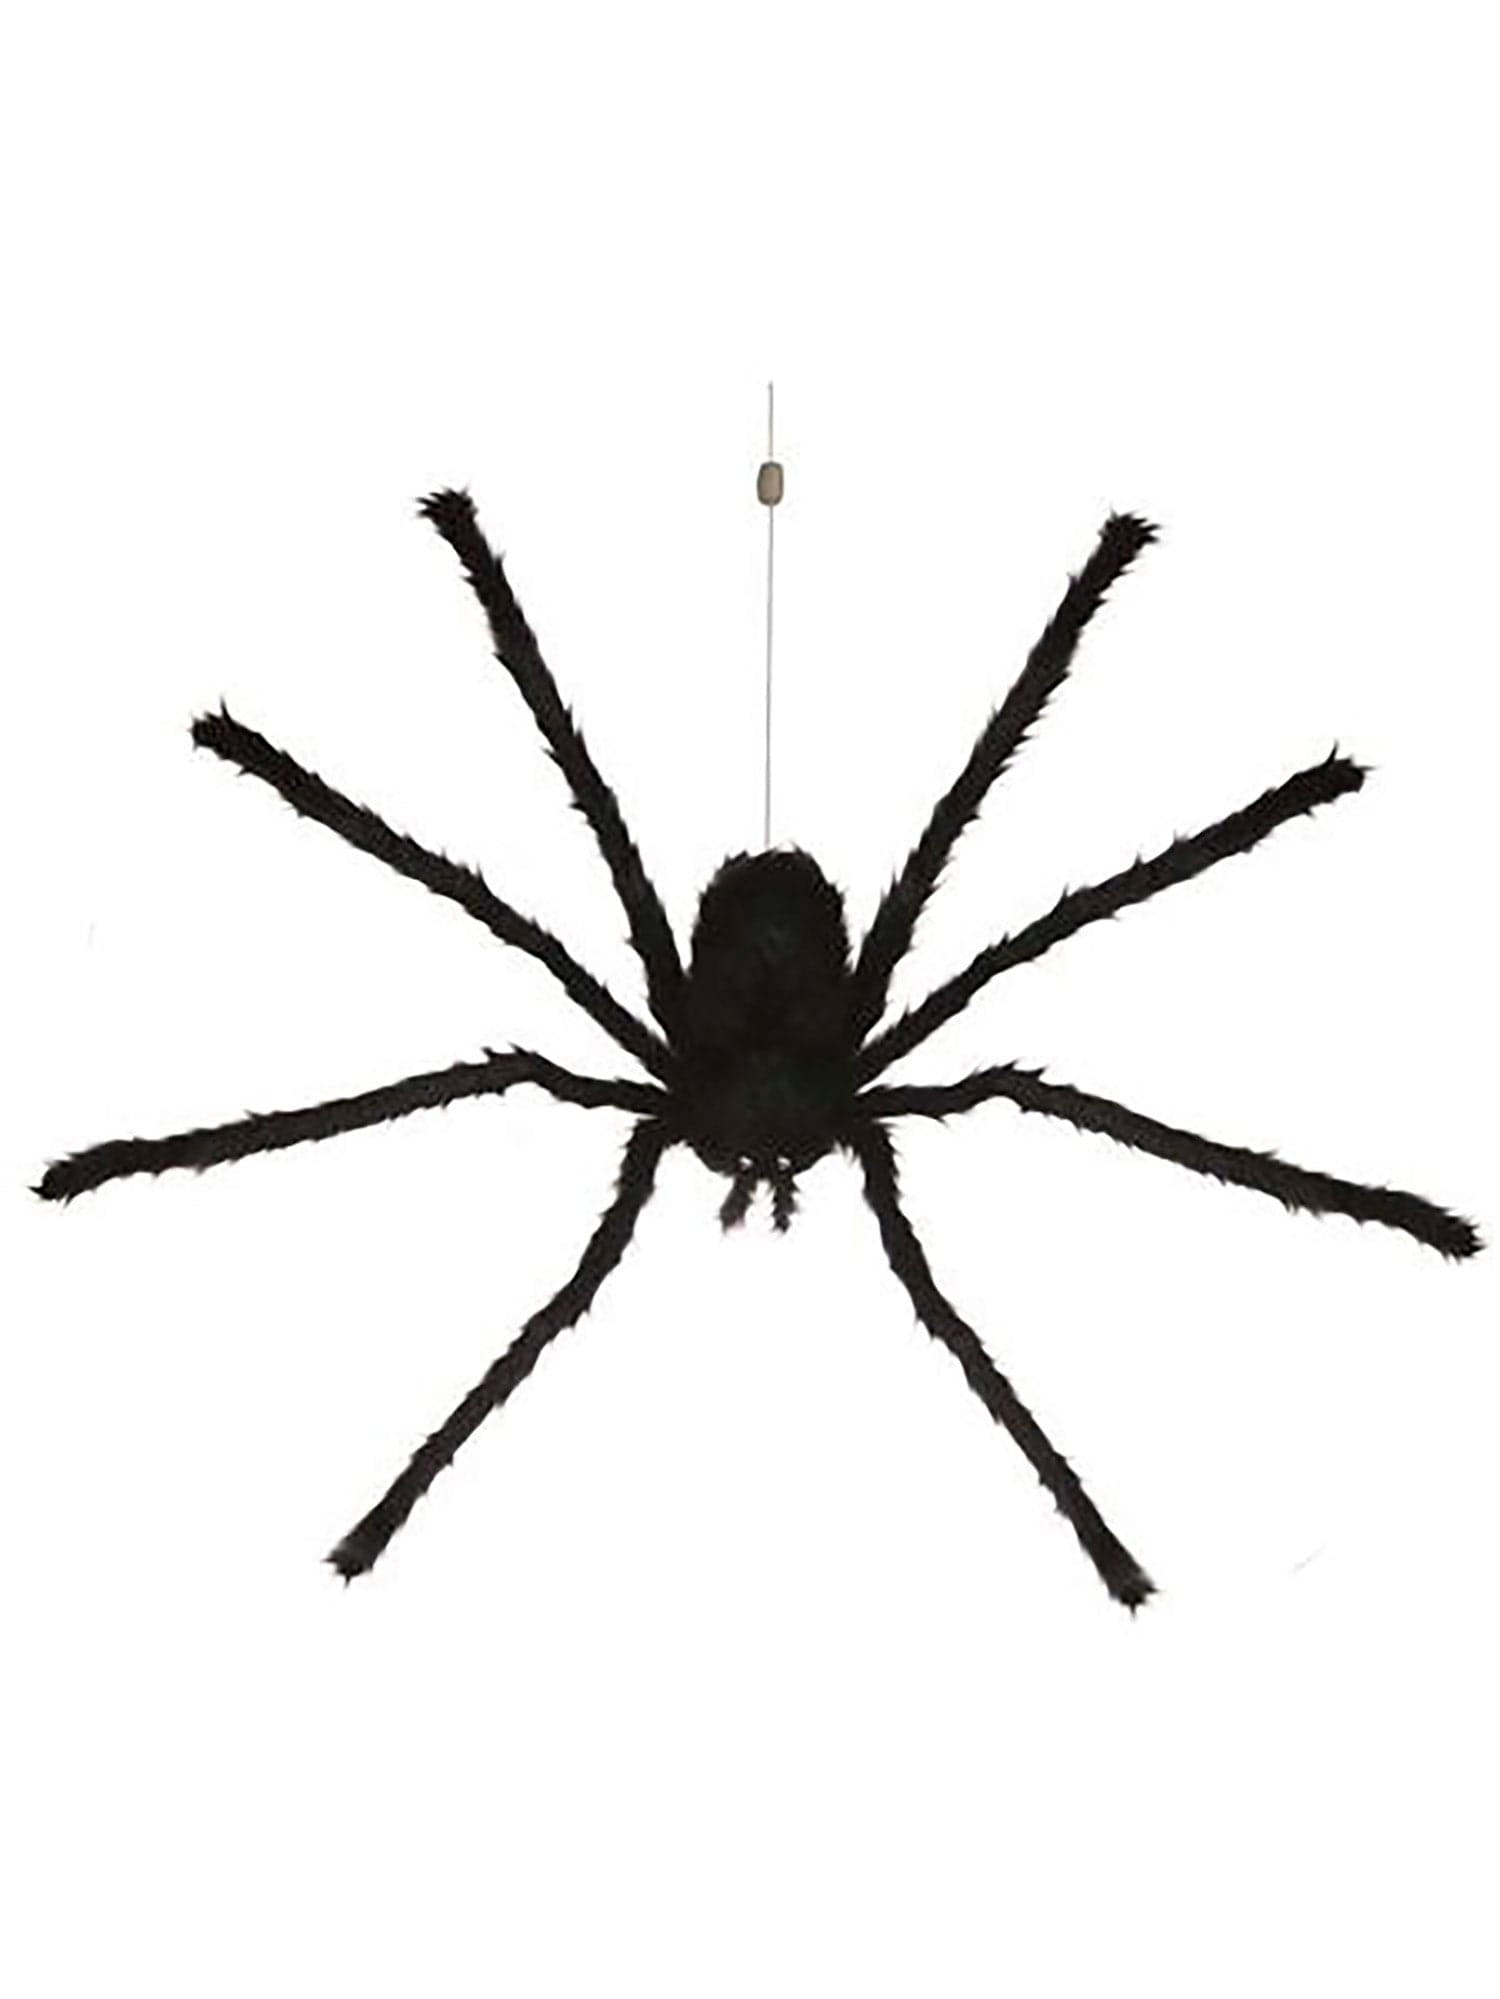 36 Inch Floating Spider Animated Prop - costumes.com